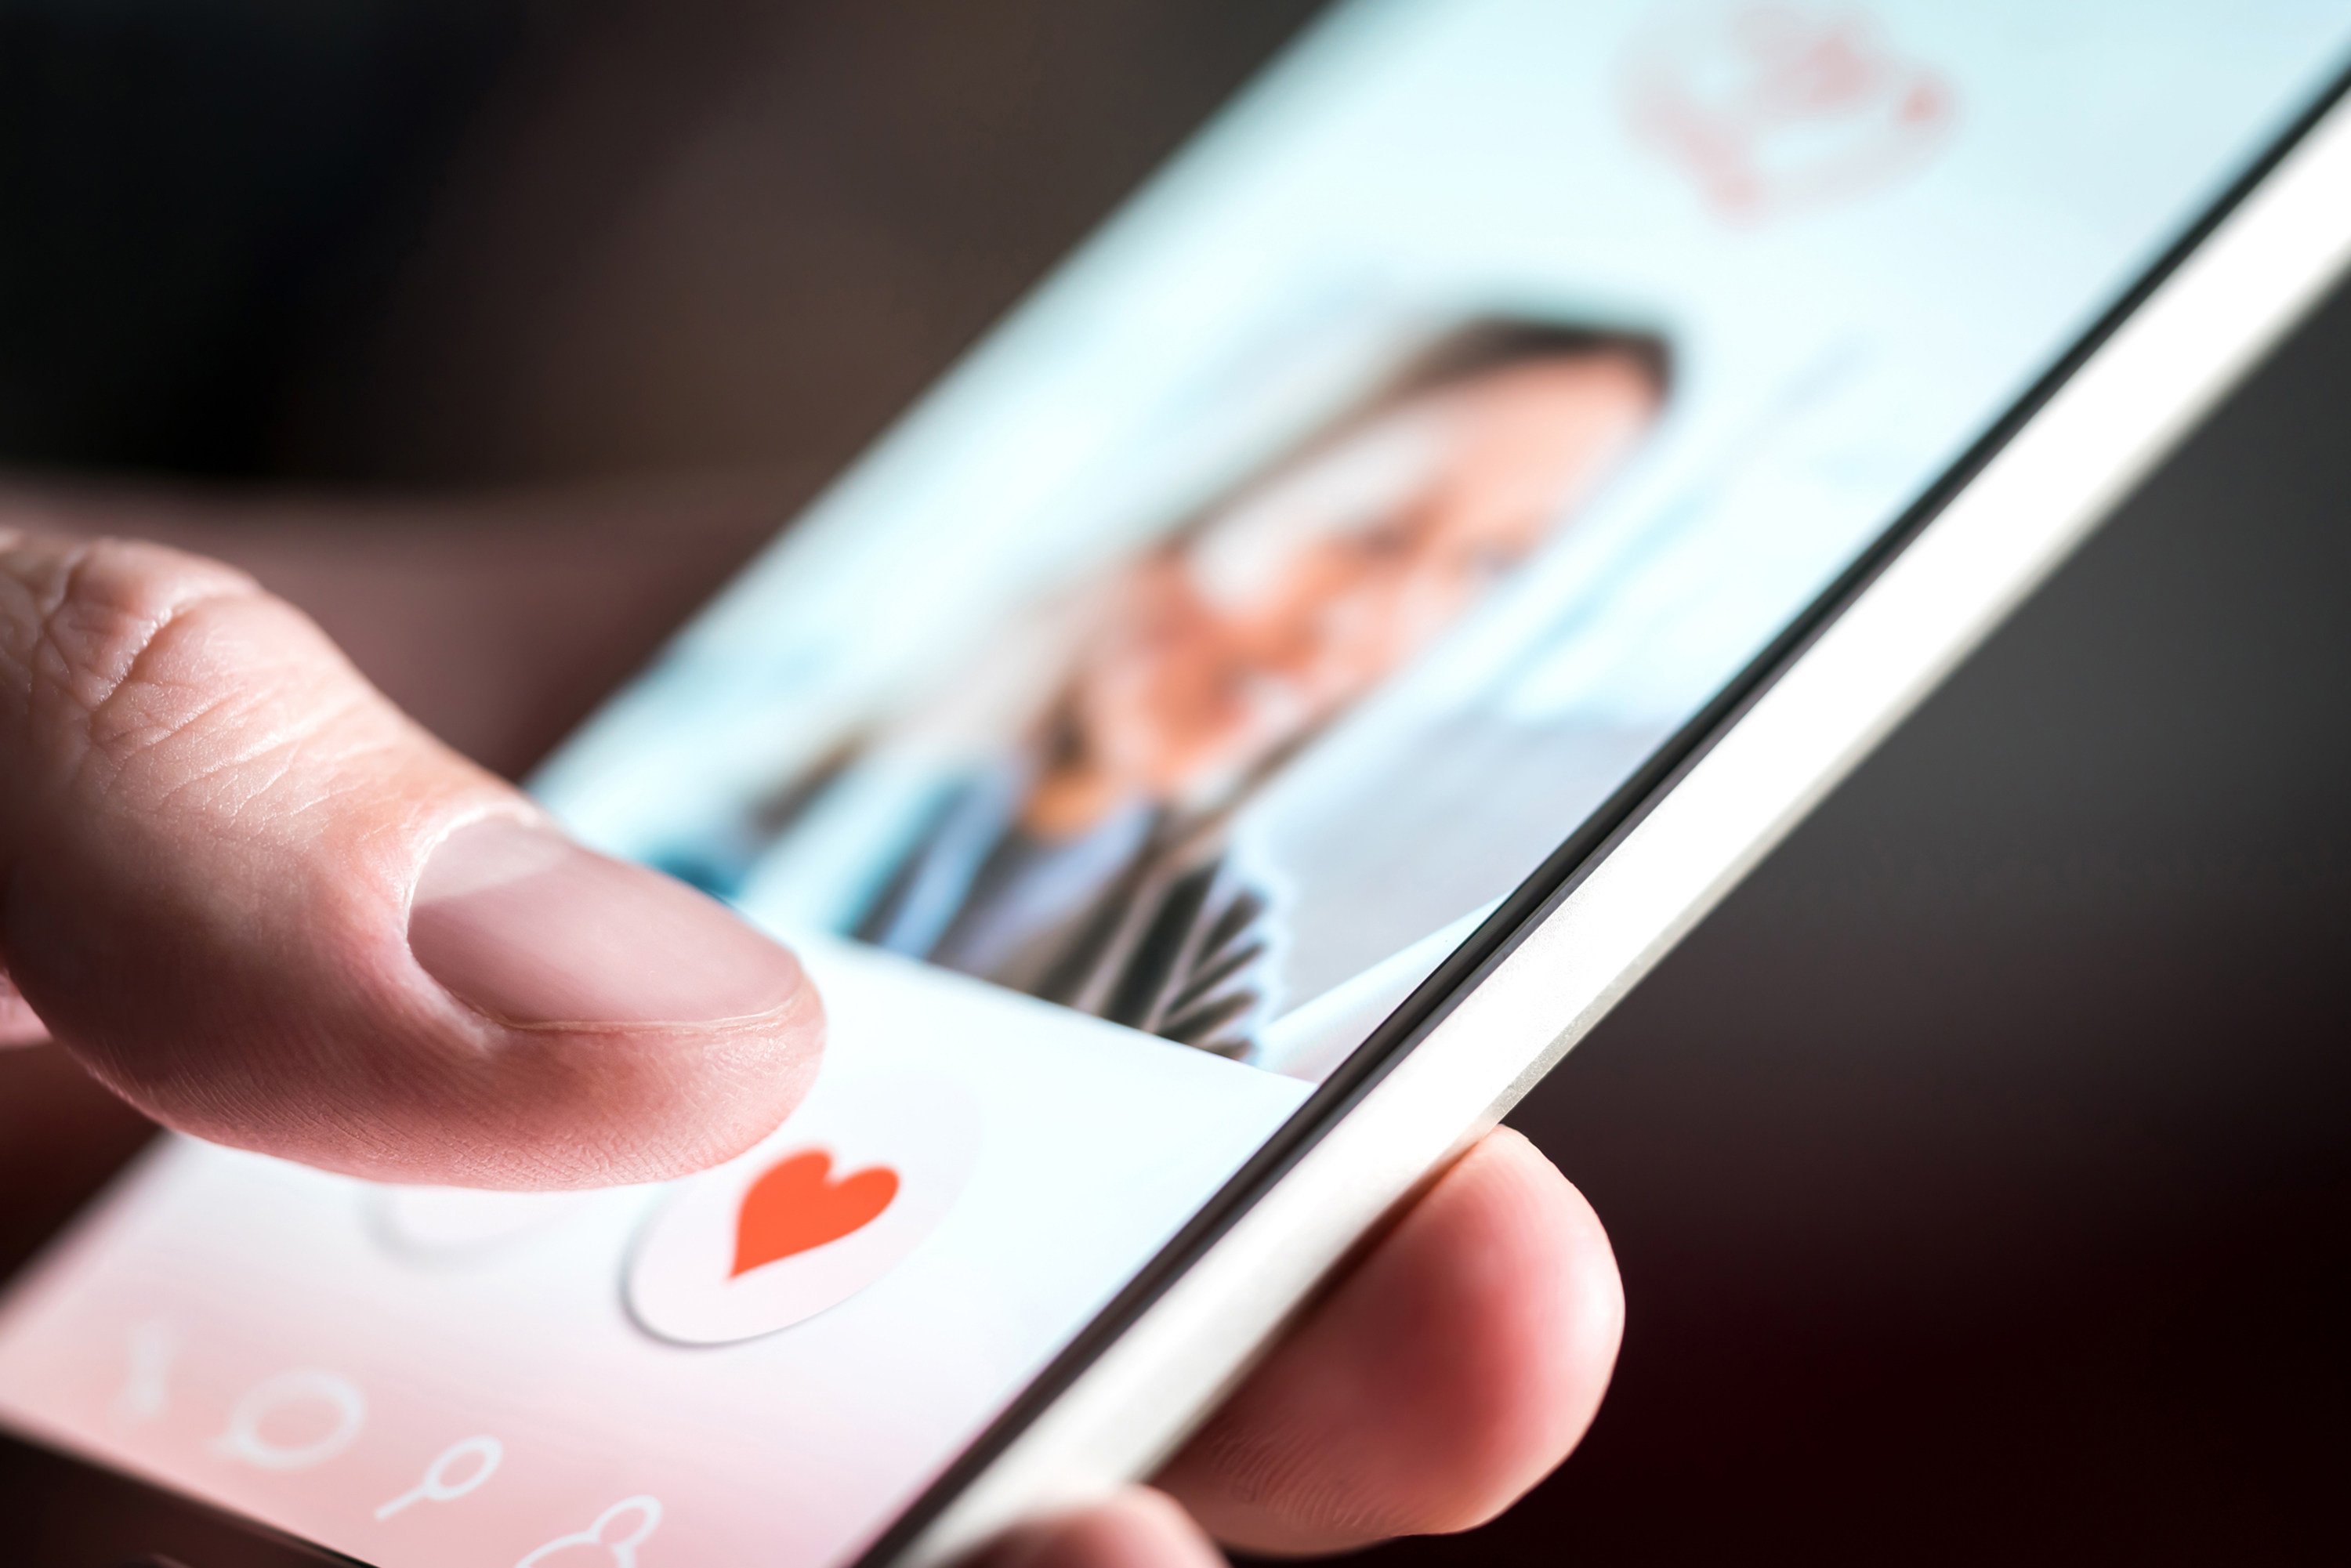 A new breed of Asian dating apps want to to upend the traditional models developed by the likes of Tinder and Bumble. Photo: TNS